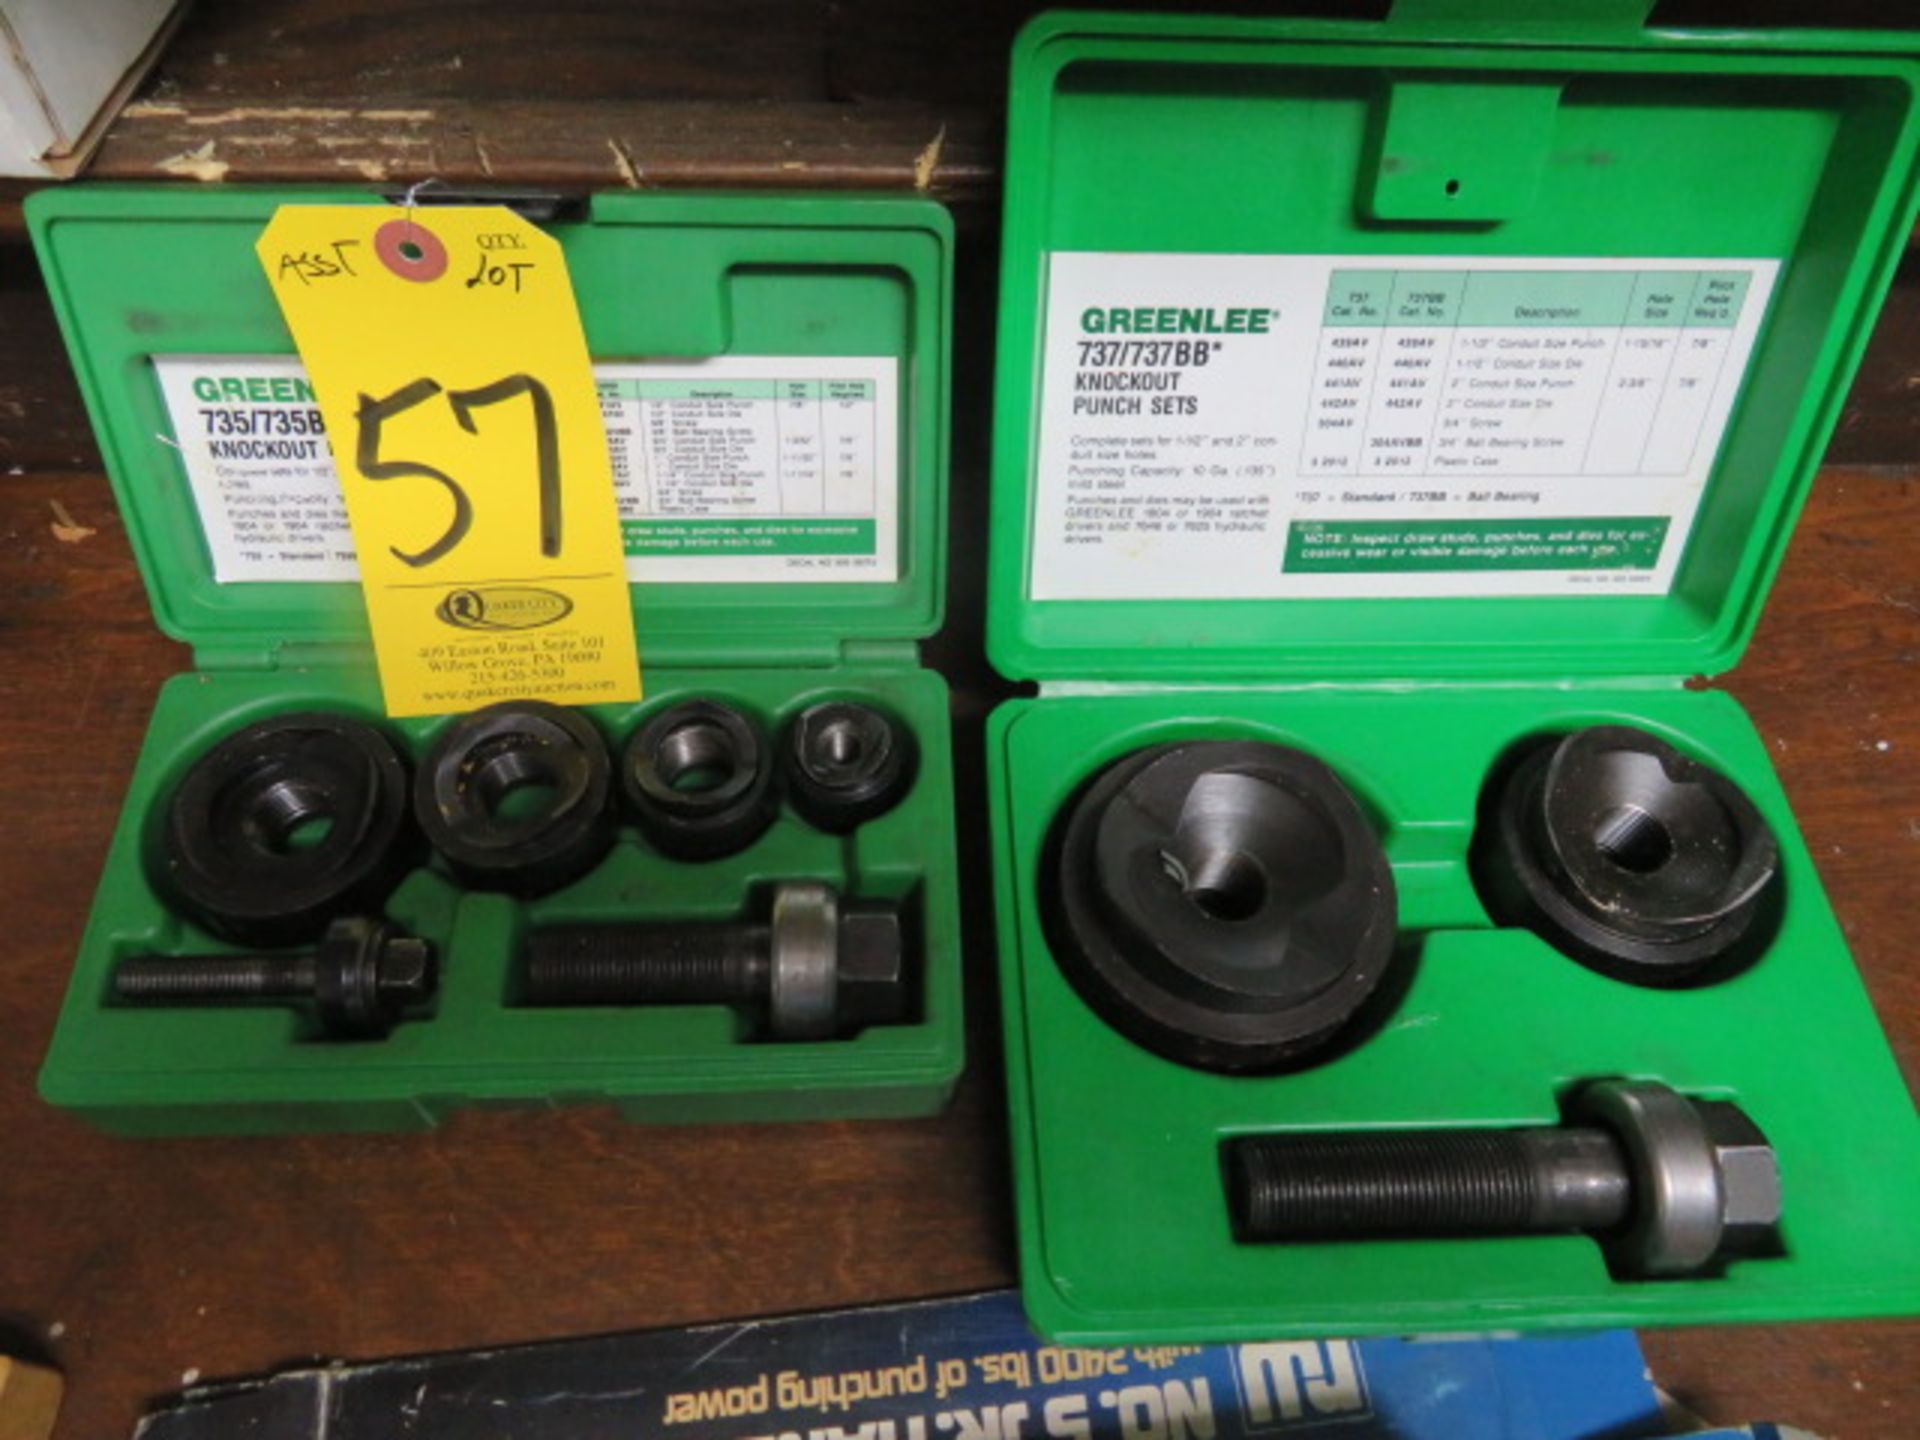 (2) GREENLEE 735BB AND 737BB KNOCKOUT PUNCH SETS